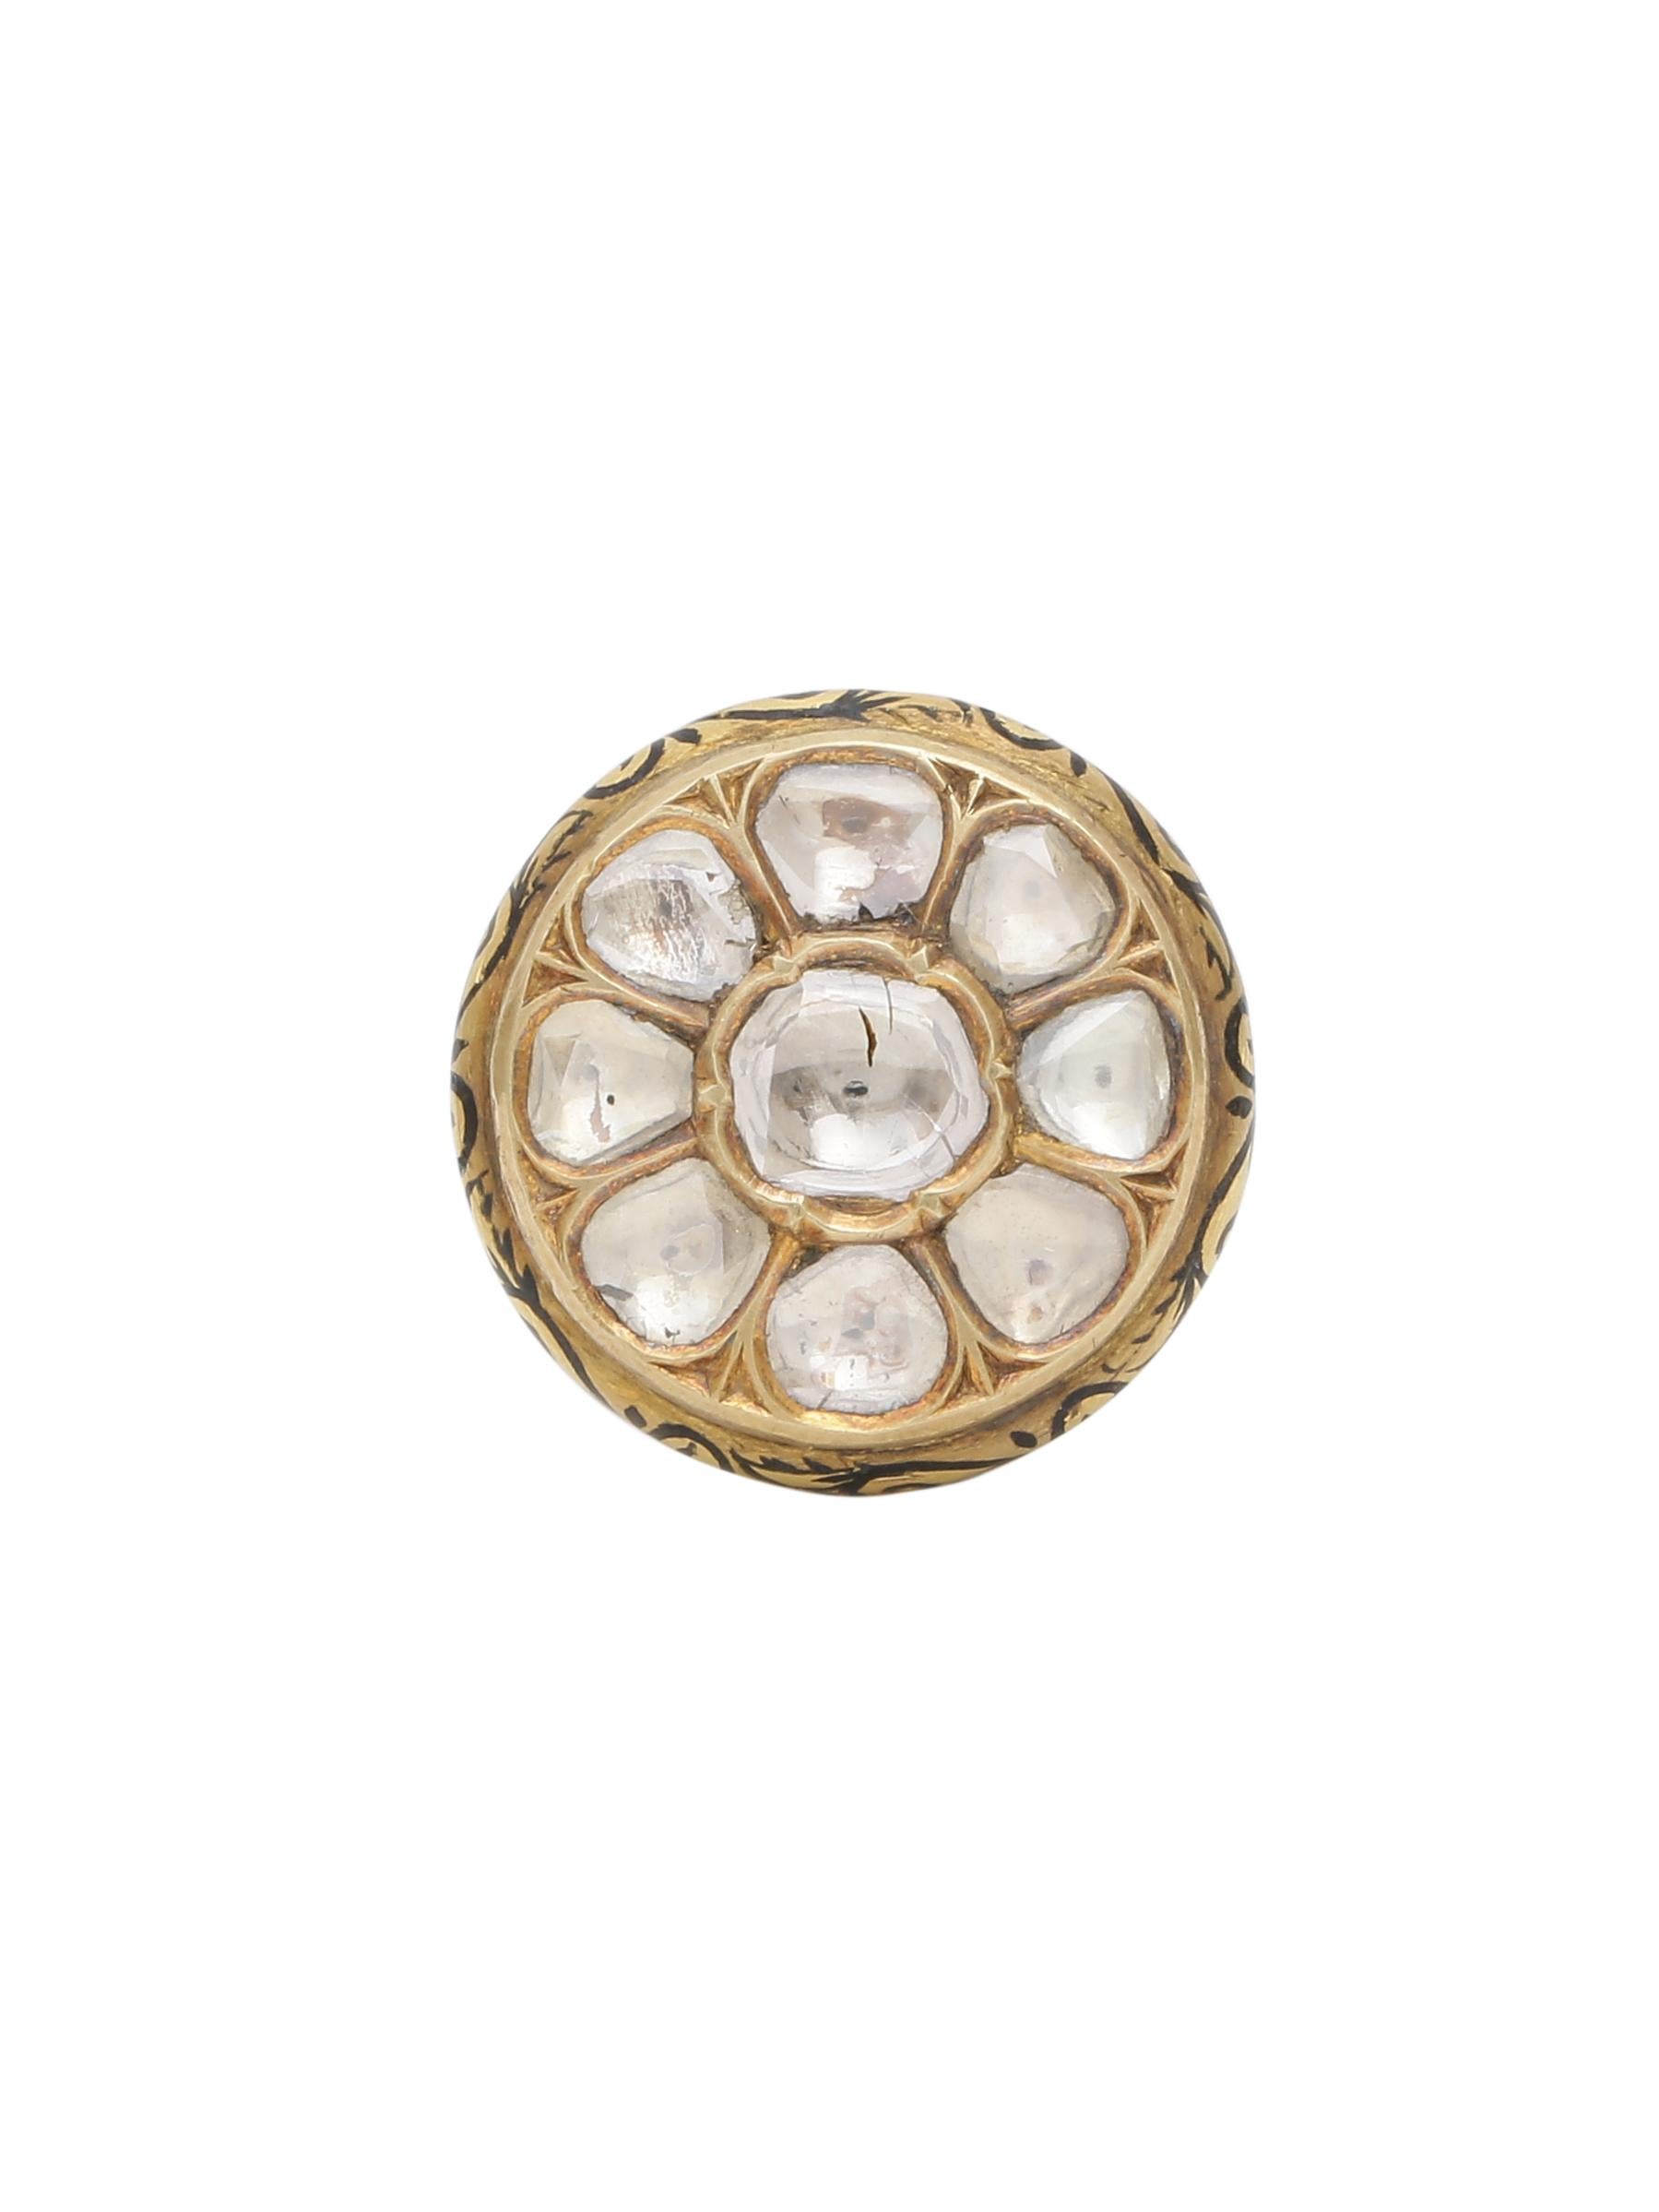 A beautiful ring with Flat Rose cut diamonds and intricate enamel work on the side and the back.
These Flat Diamonds are called 